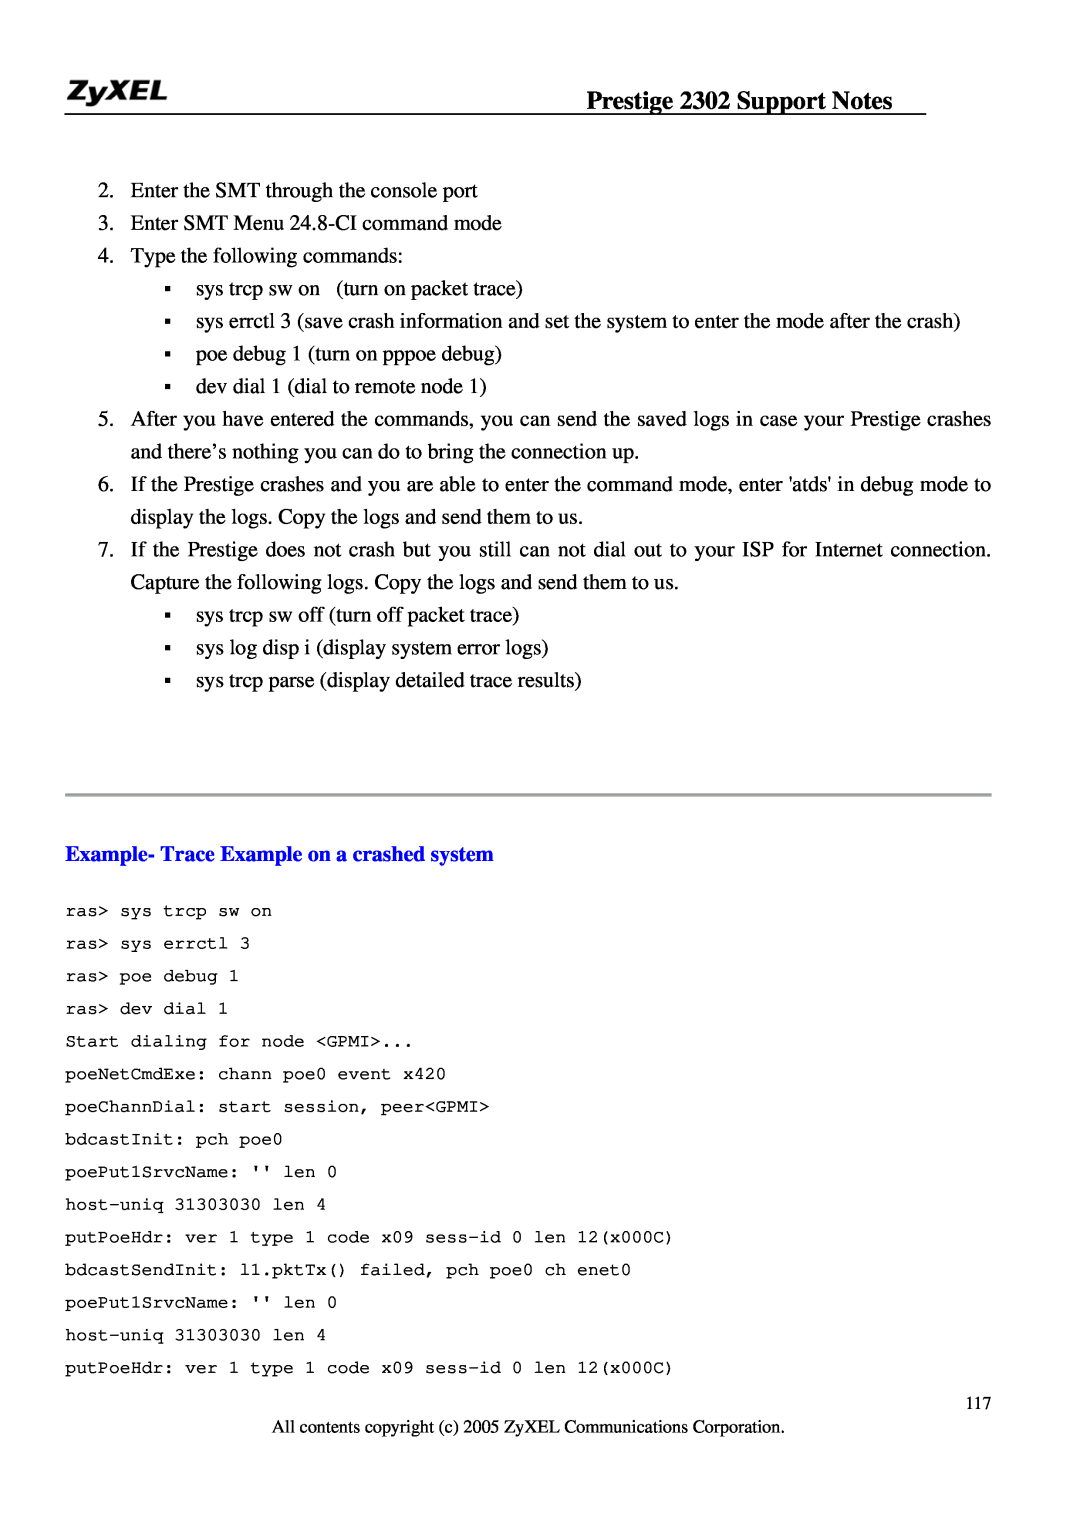 ZyXEL Communications P-2302HW manual Example- Trace Example on a crashed system, Prestige 2302 Support Notes 